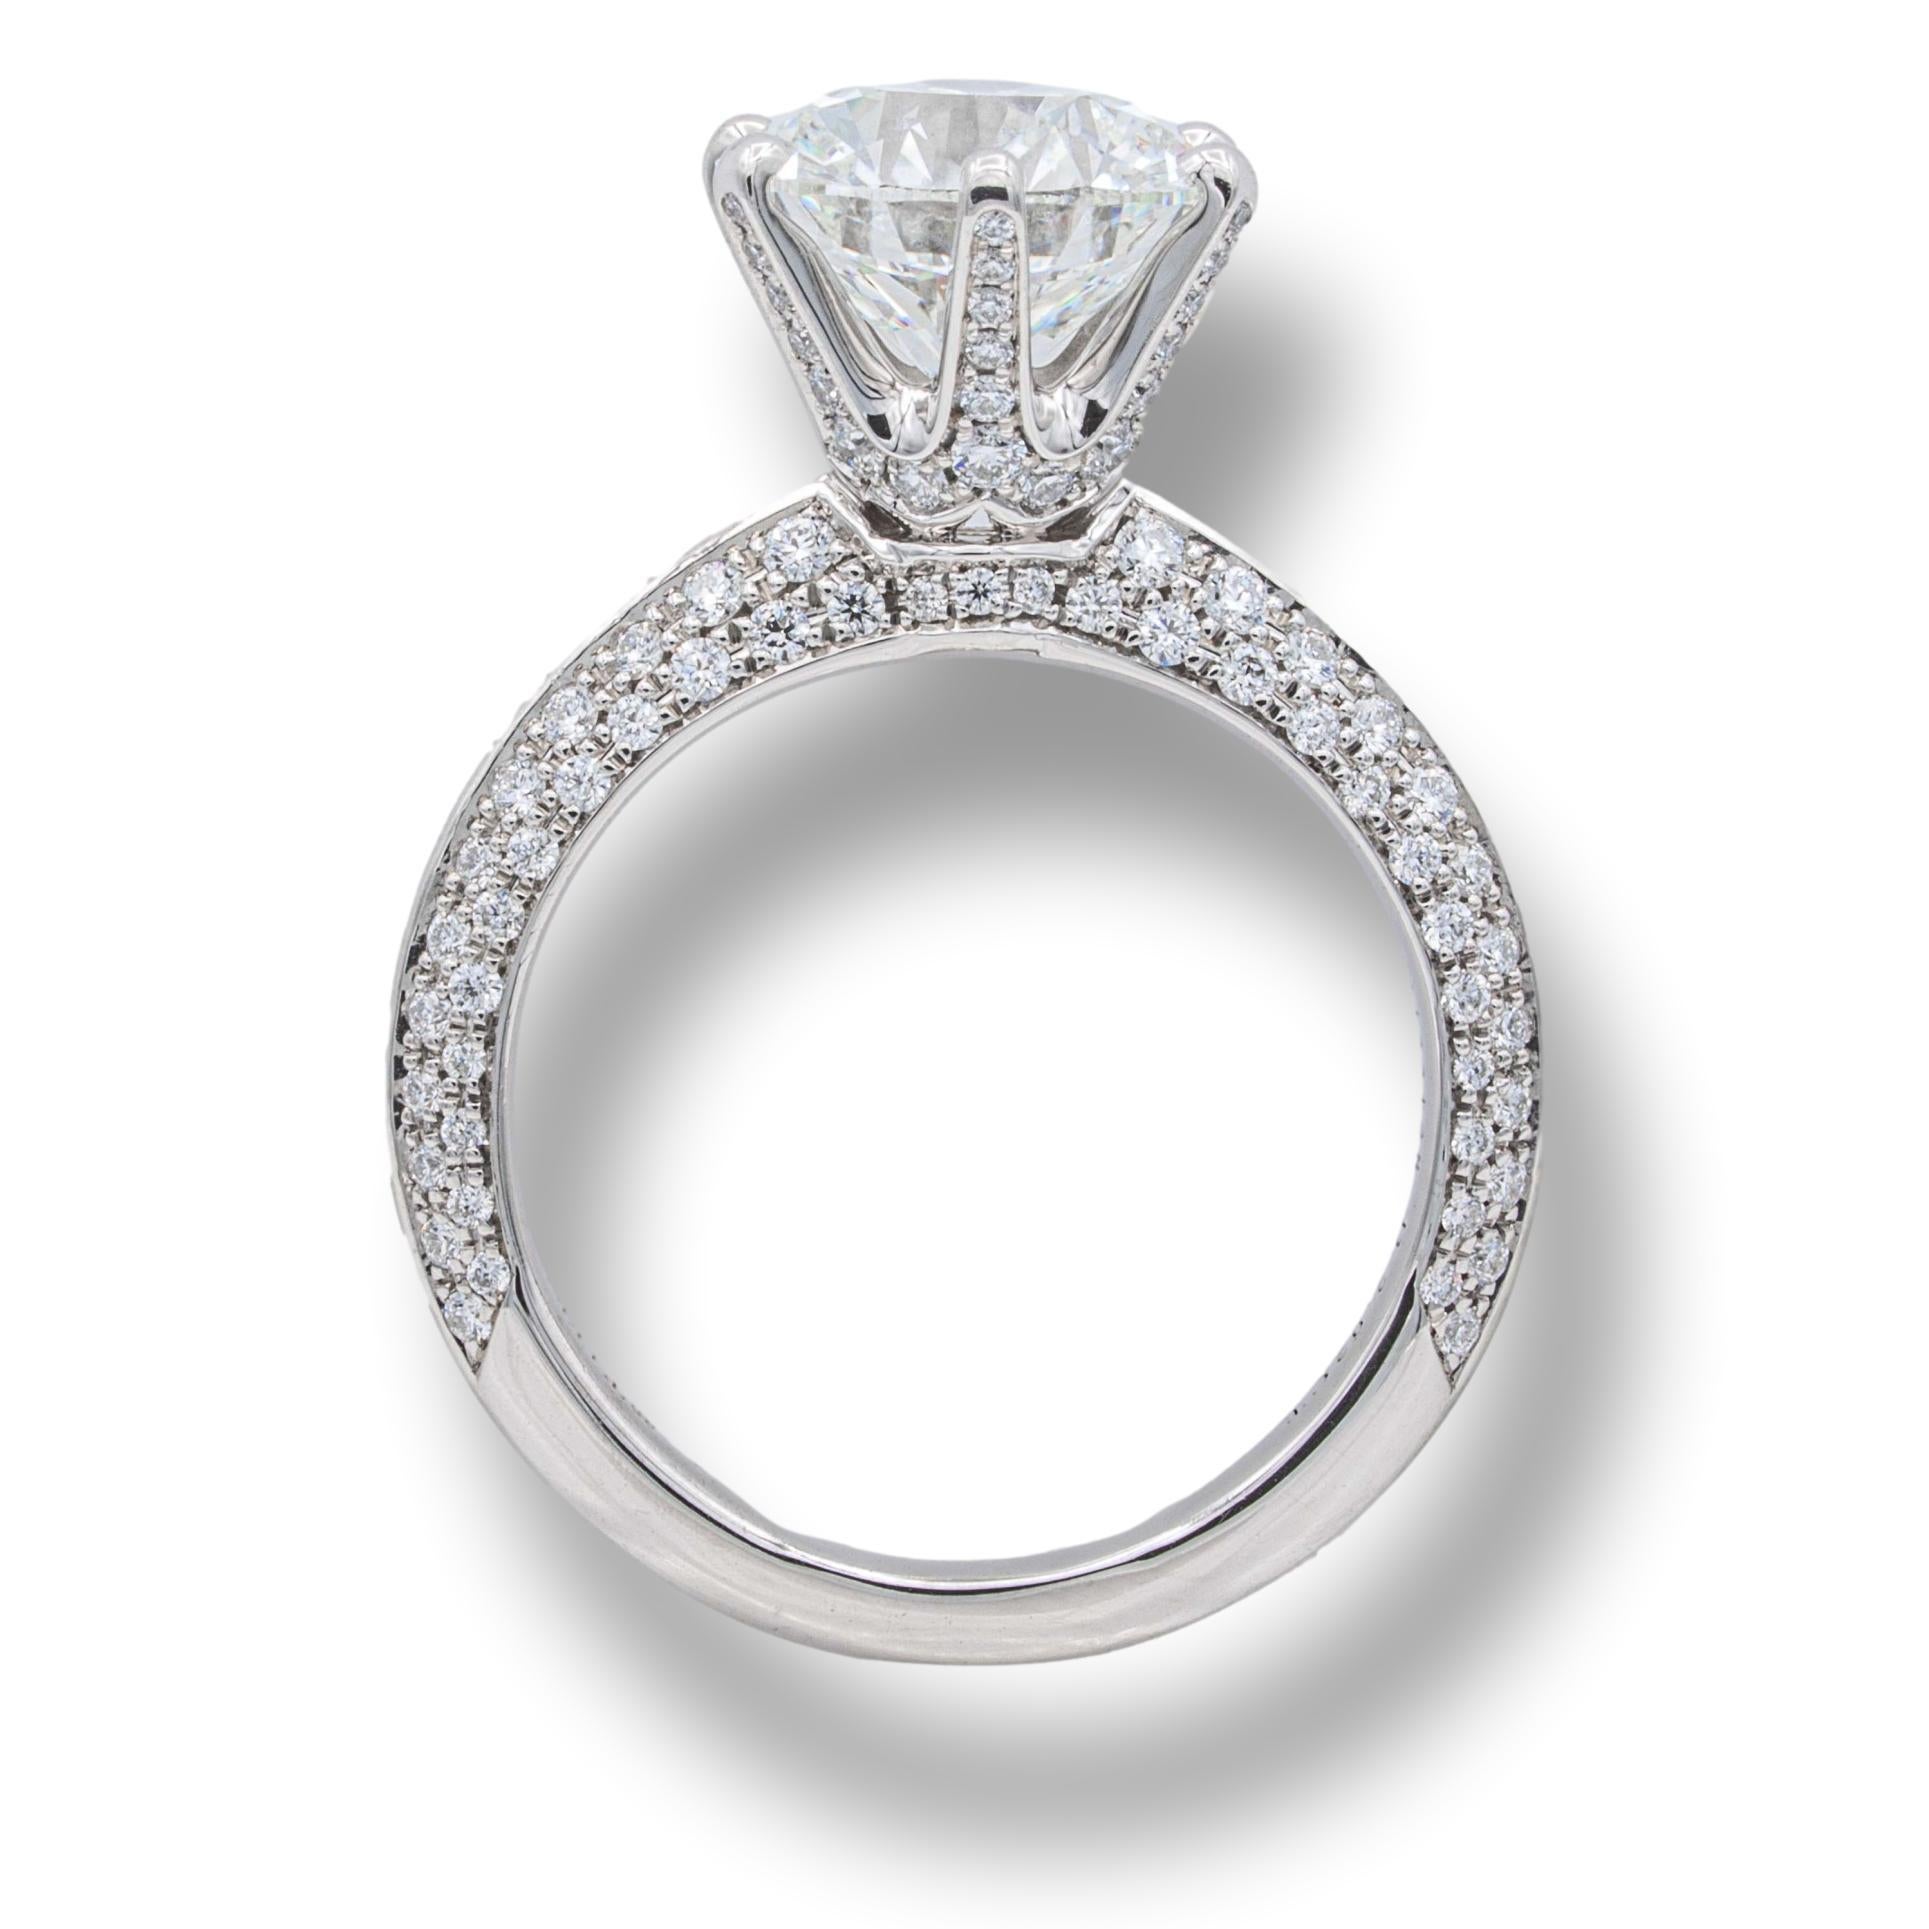 Tiffany & Co. Engagement ring from the pave setting collection finely crafted in platinum featuring a round brilliant cut center triple excellent 2.02 ct H color VVS2 clarity with a knife edge design shank set with 2 rows of micro pave diamonds on